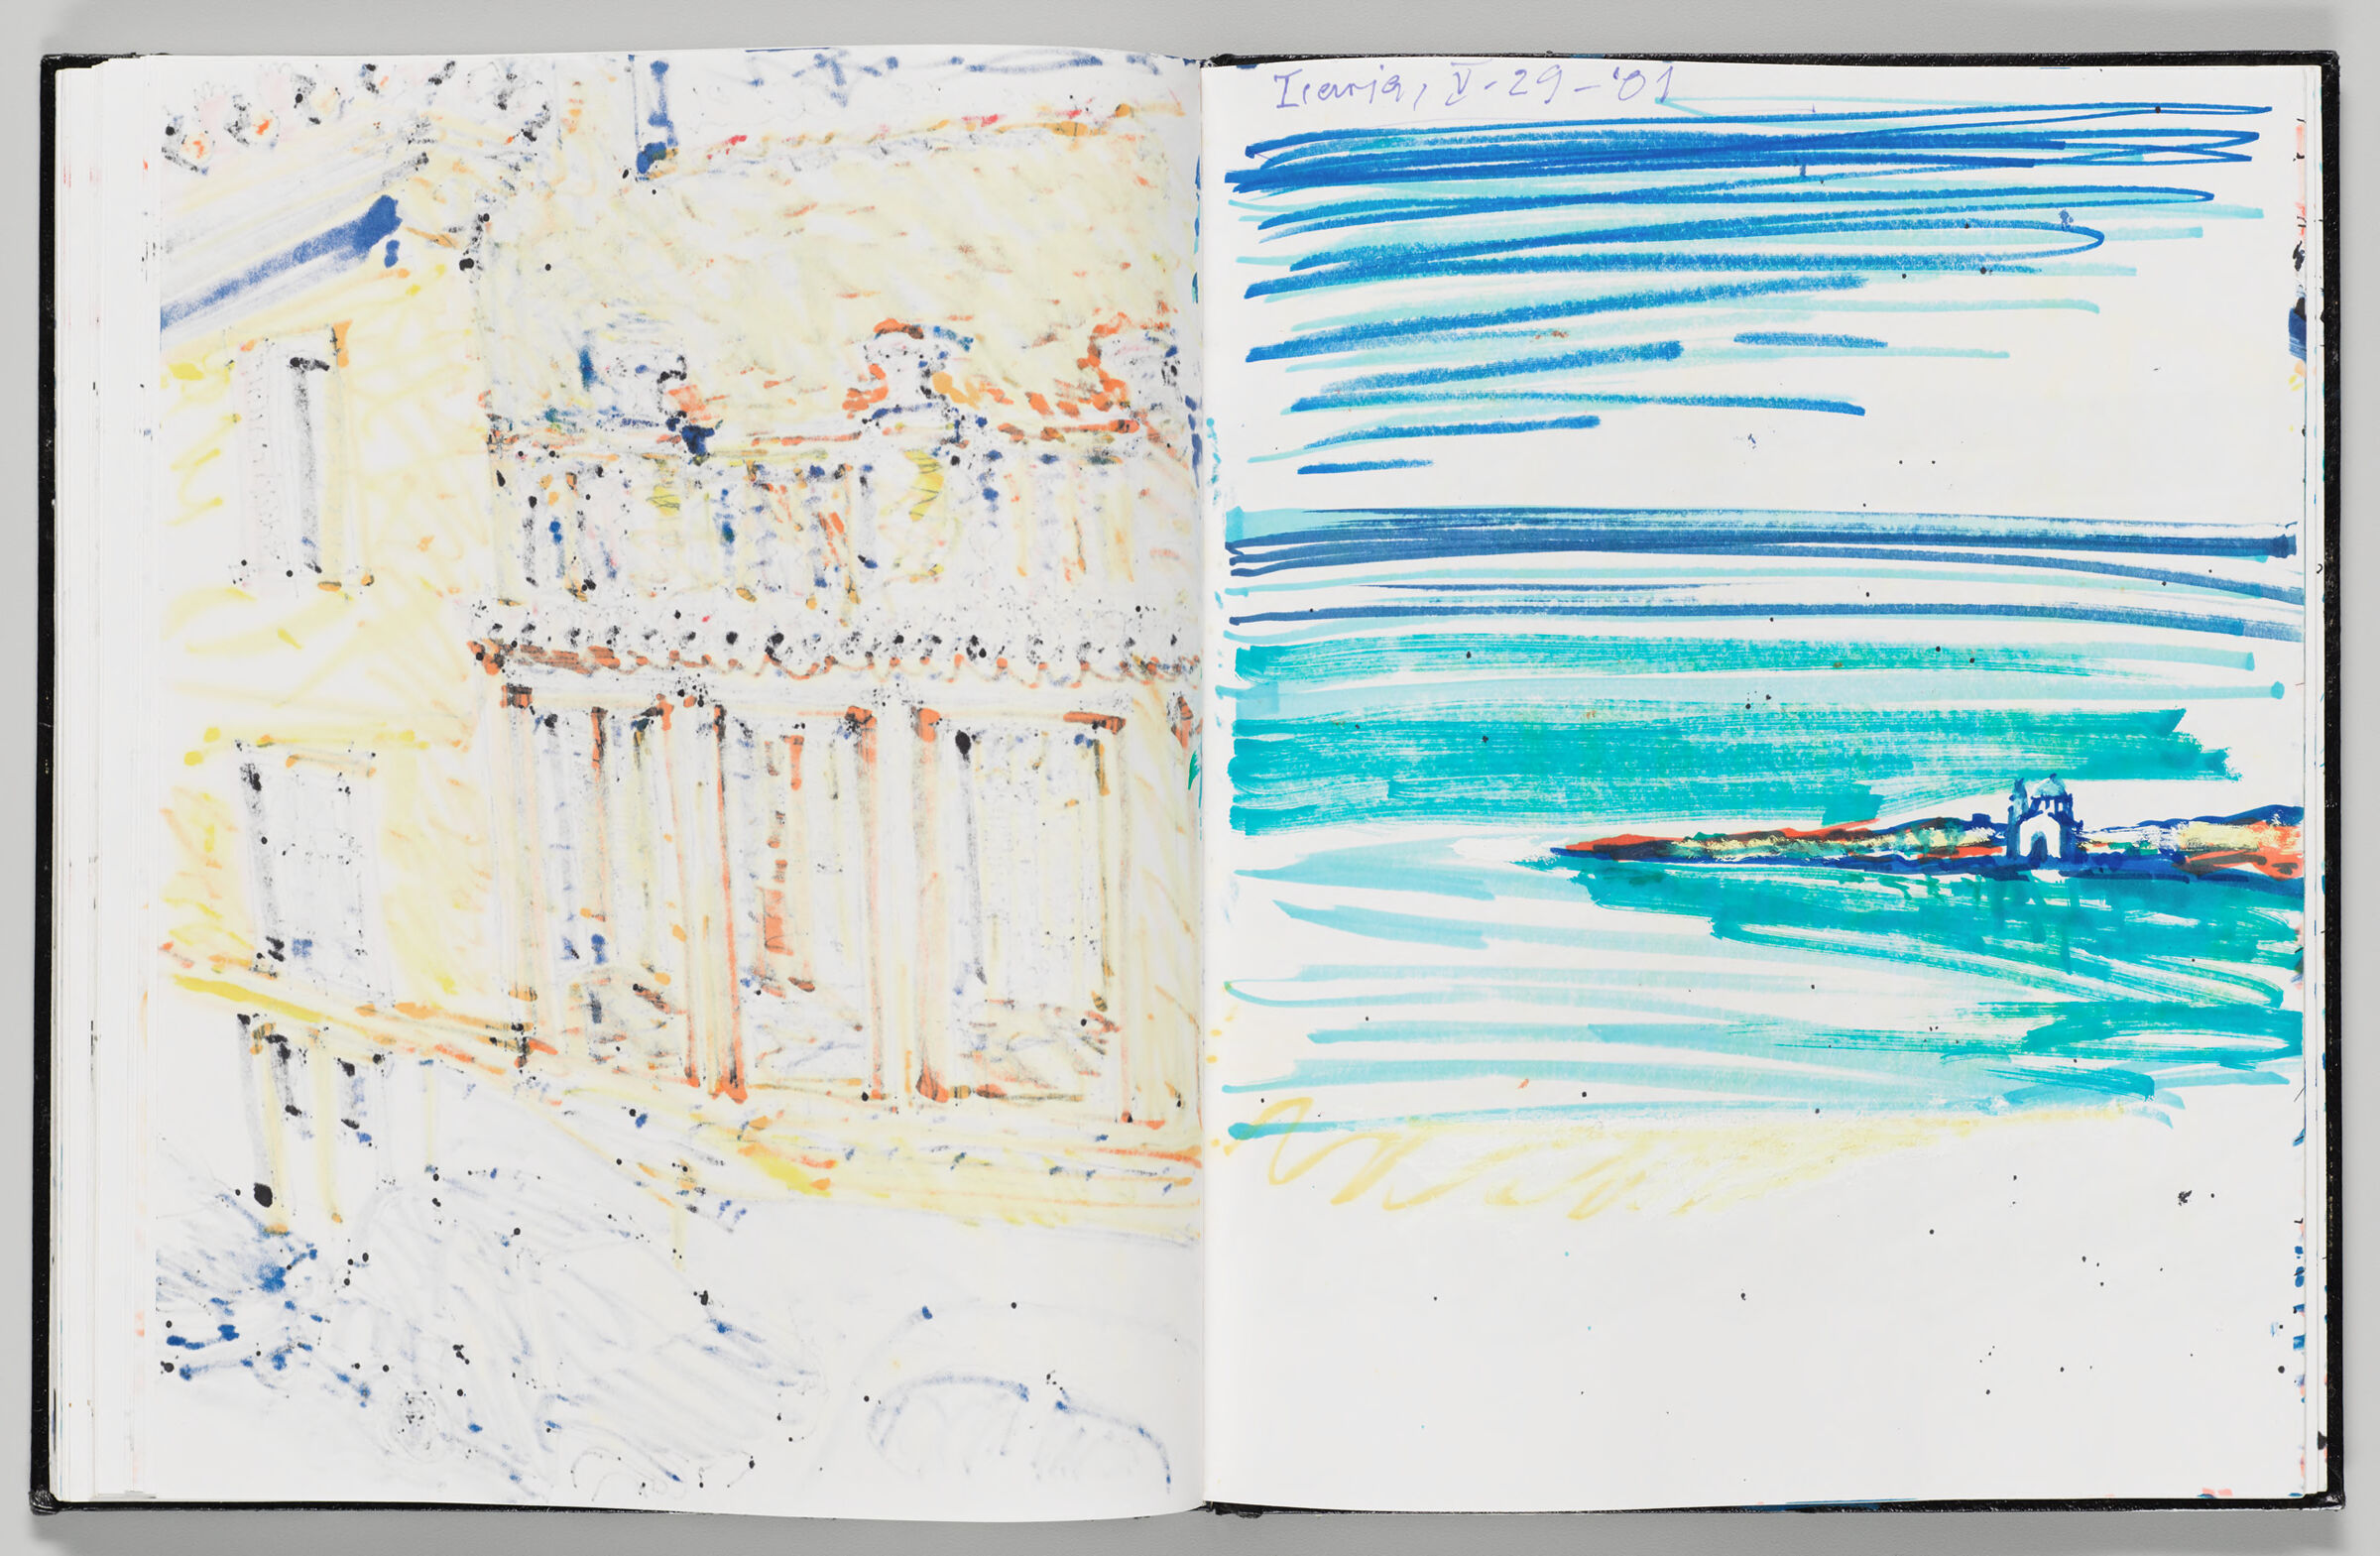 Untitled (Bleed-Through From Previous Page, Left Page); Untitled (View Of Icaria, Right Page)